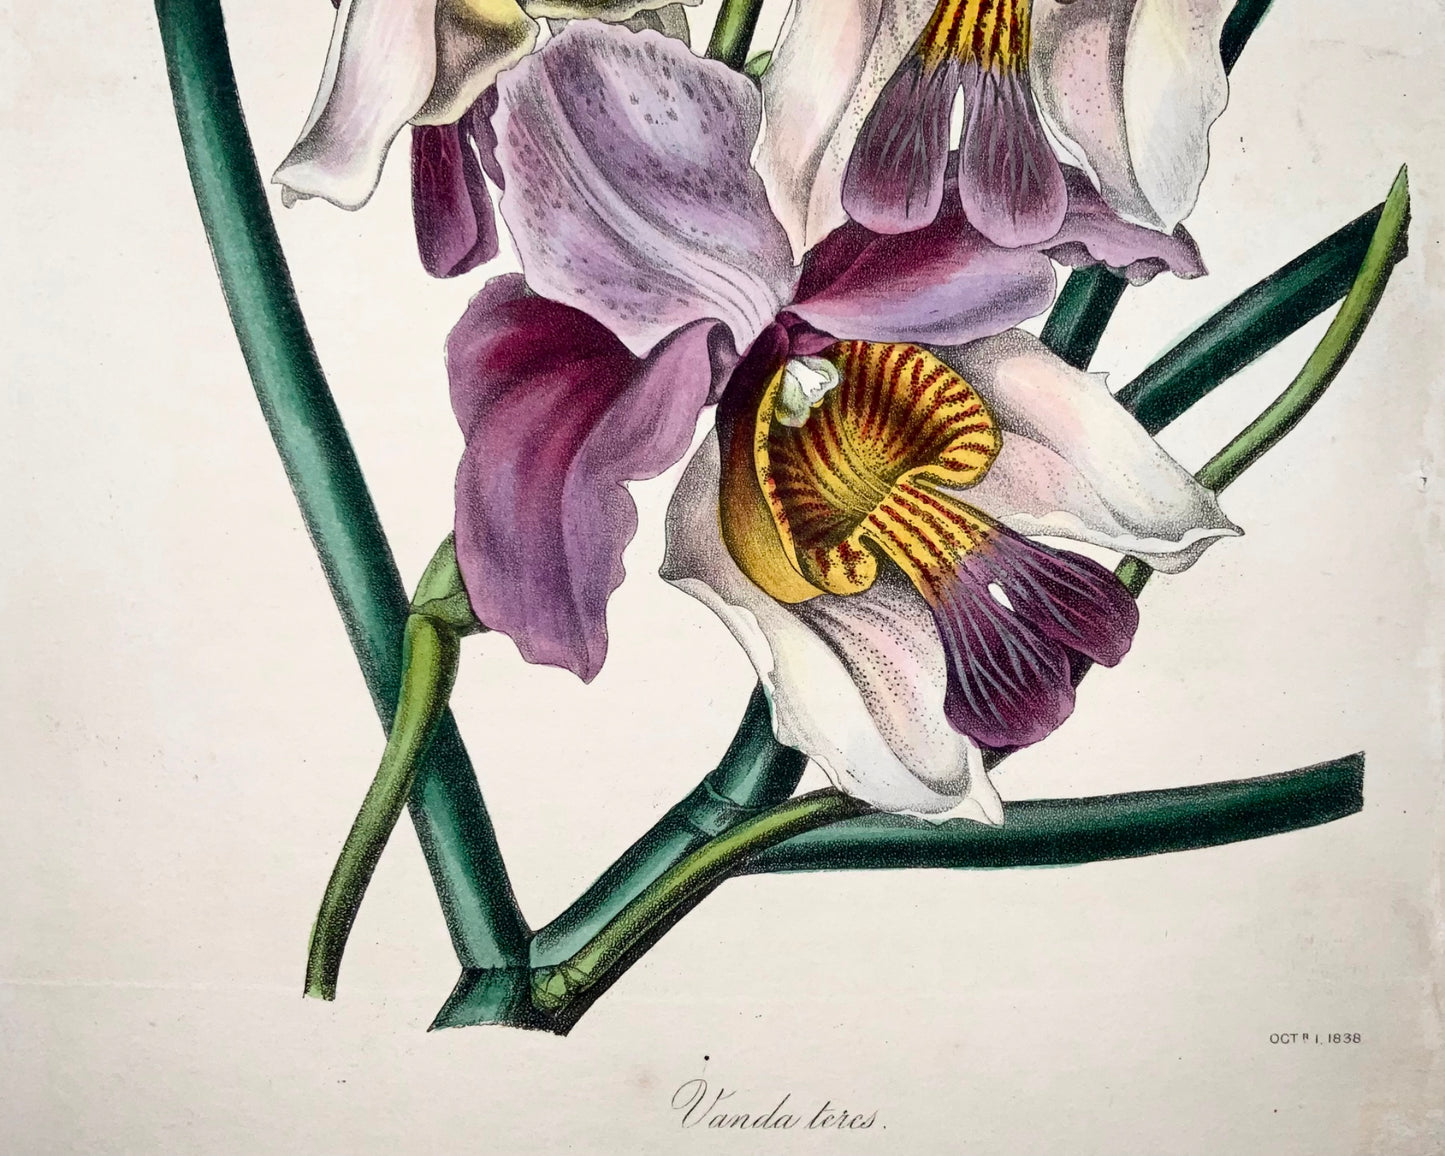 1838 Vanda teres orchid, [Smith], lithograph with fine original hand colour